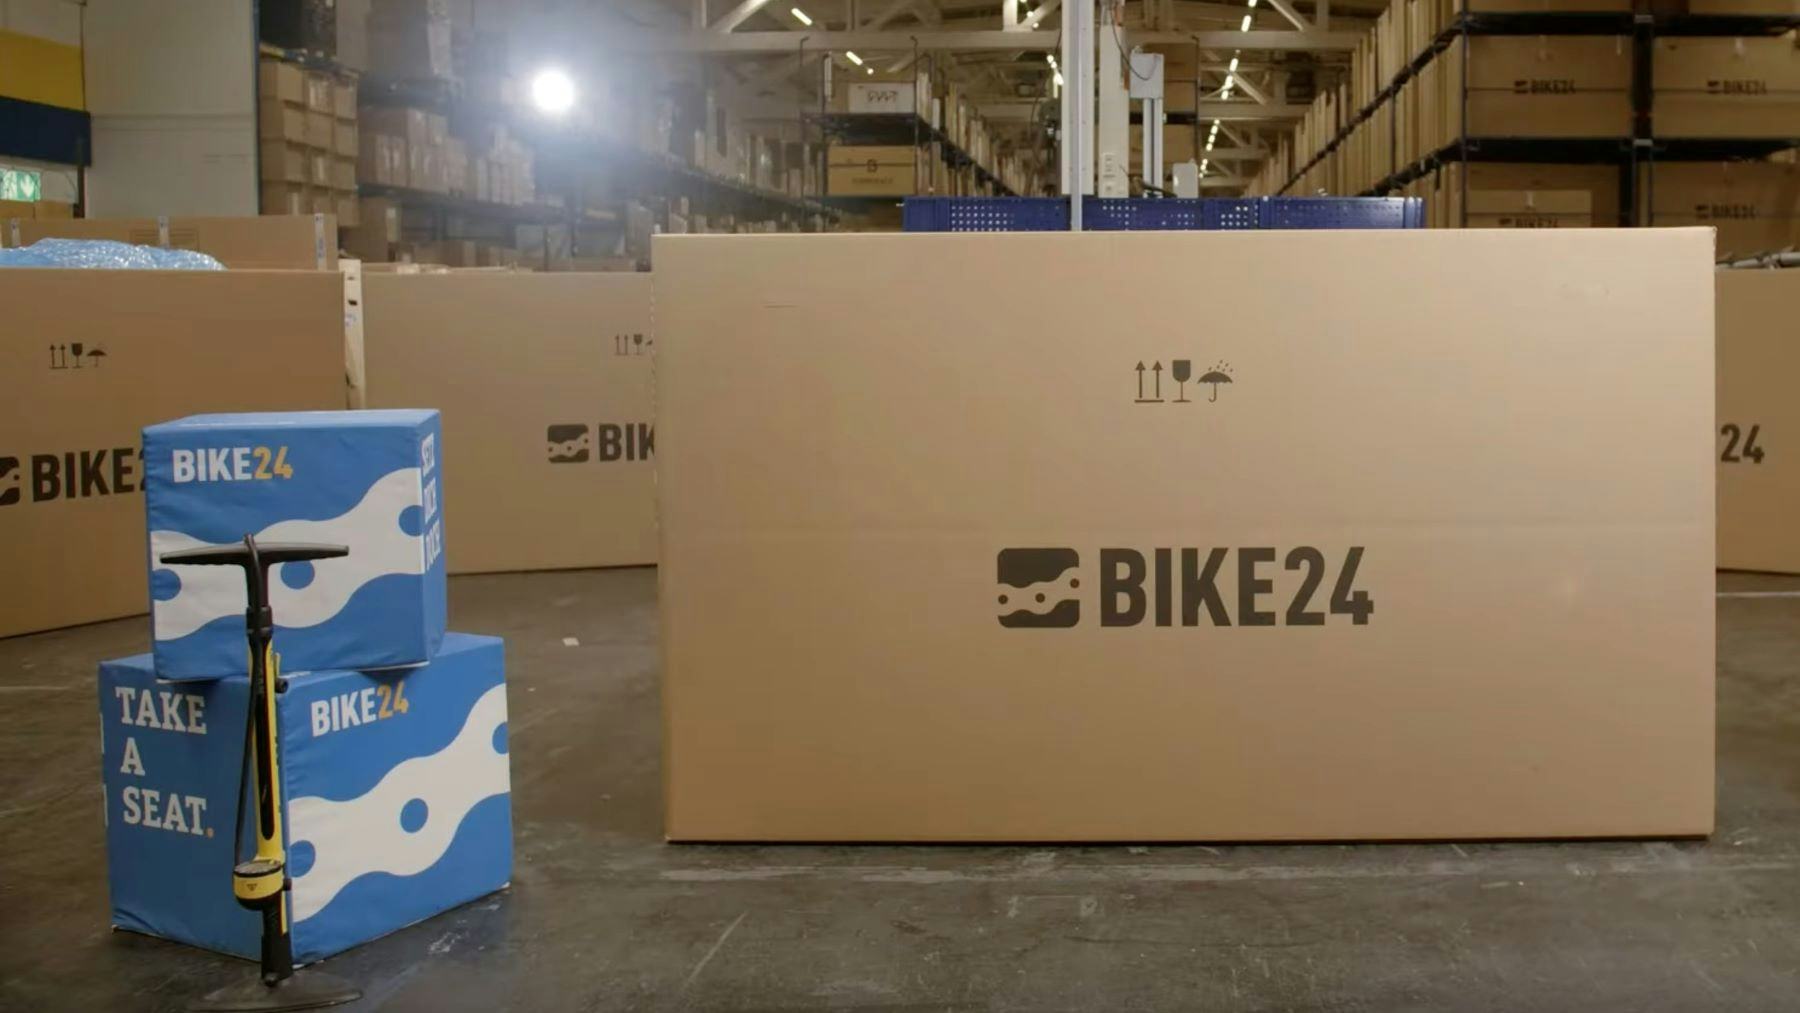 Bike24’s total sales were down -16% to €61.1 million in the third quarter due to persistently poor consumer sentiment in the core market DACH. - Photo Bike24